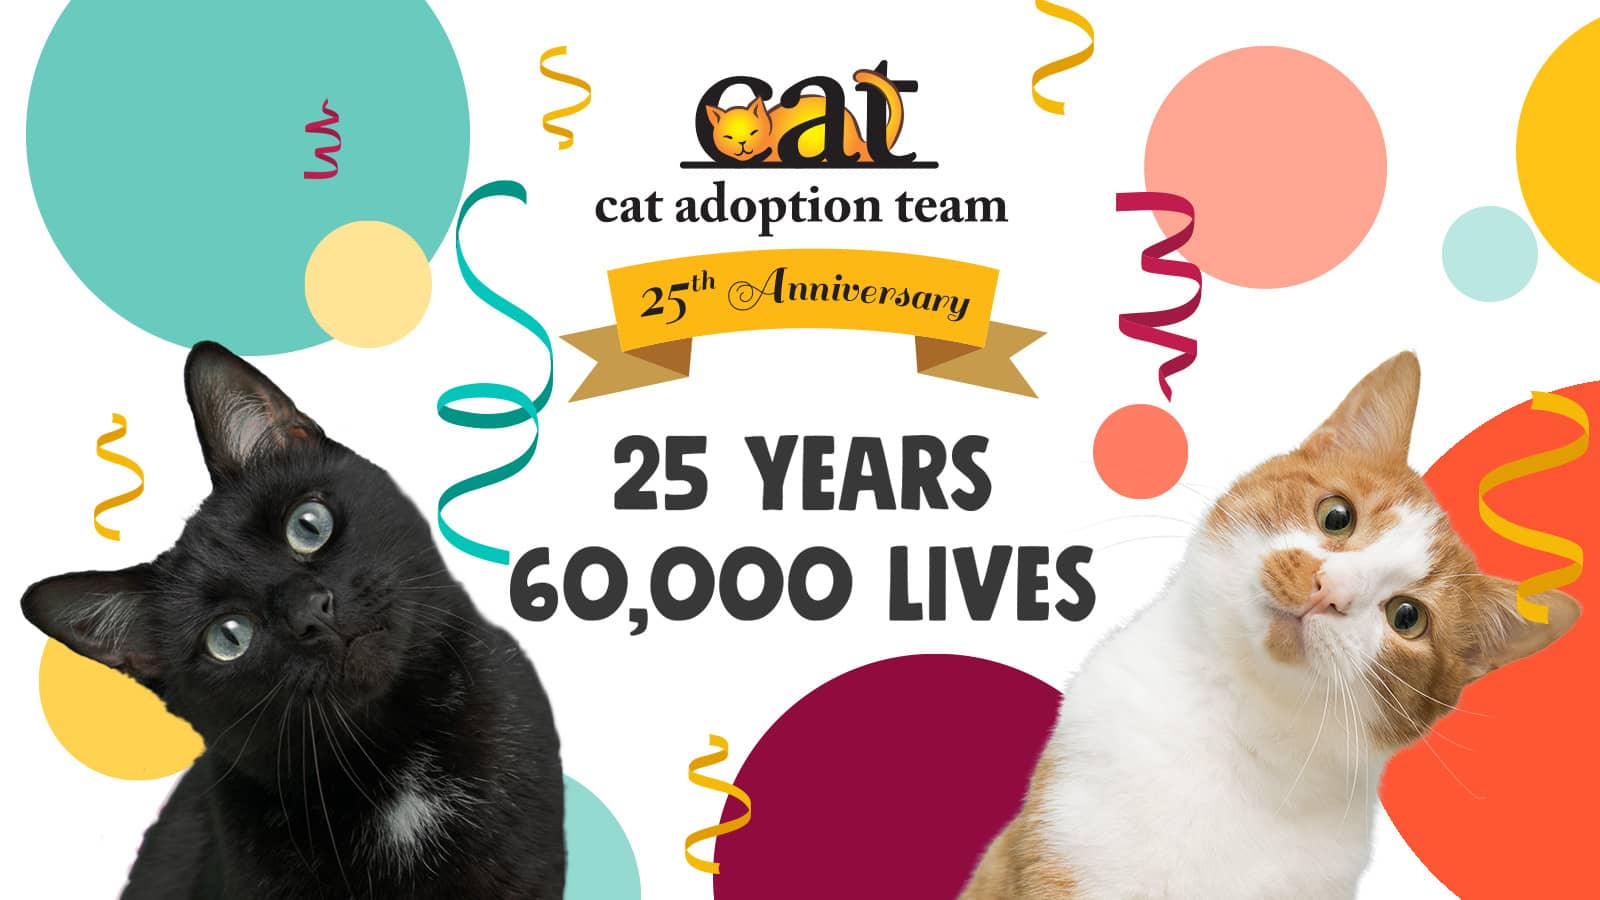 Colorful circles, confetti, and two cute cats surround the Cat Adoption Team's 25th Anniversary logo and the words 25 years,60,000 lives.